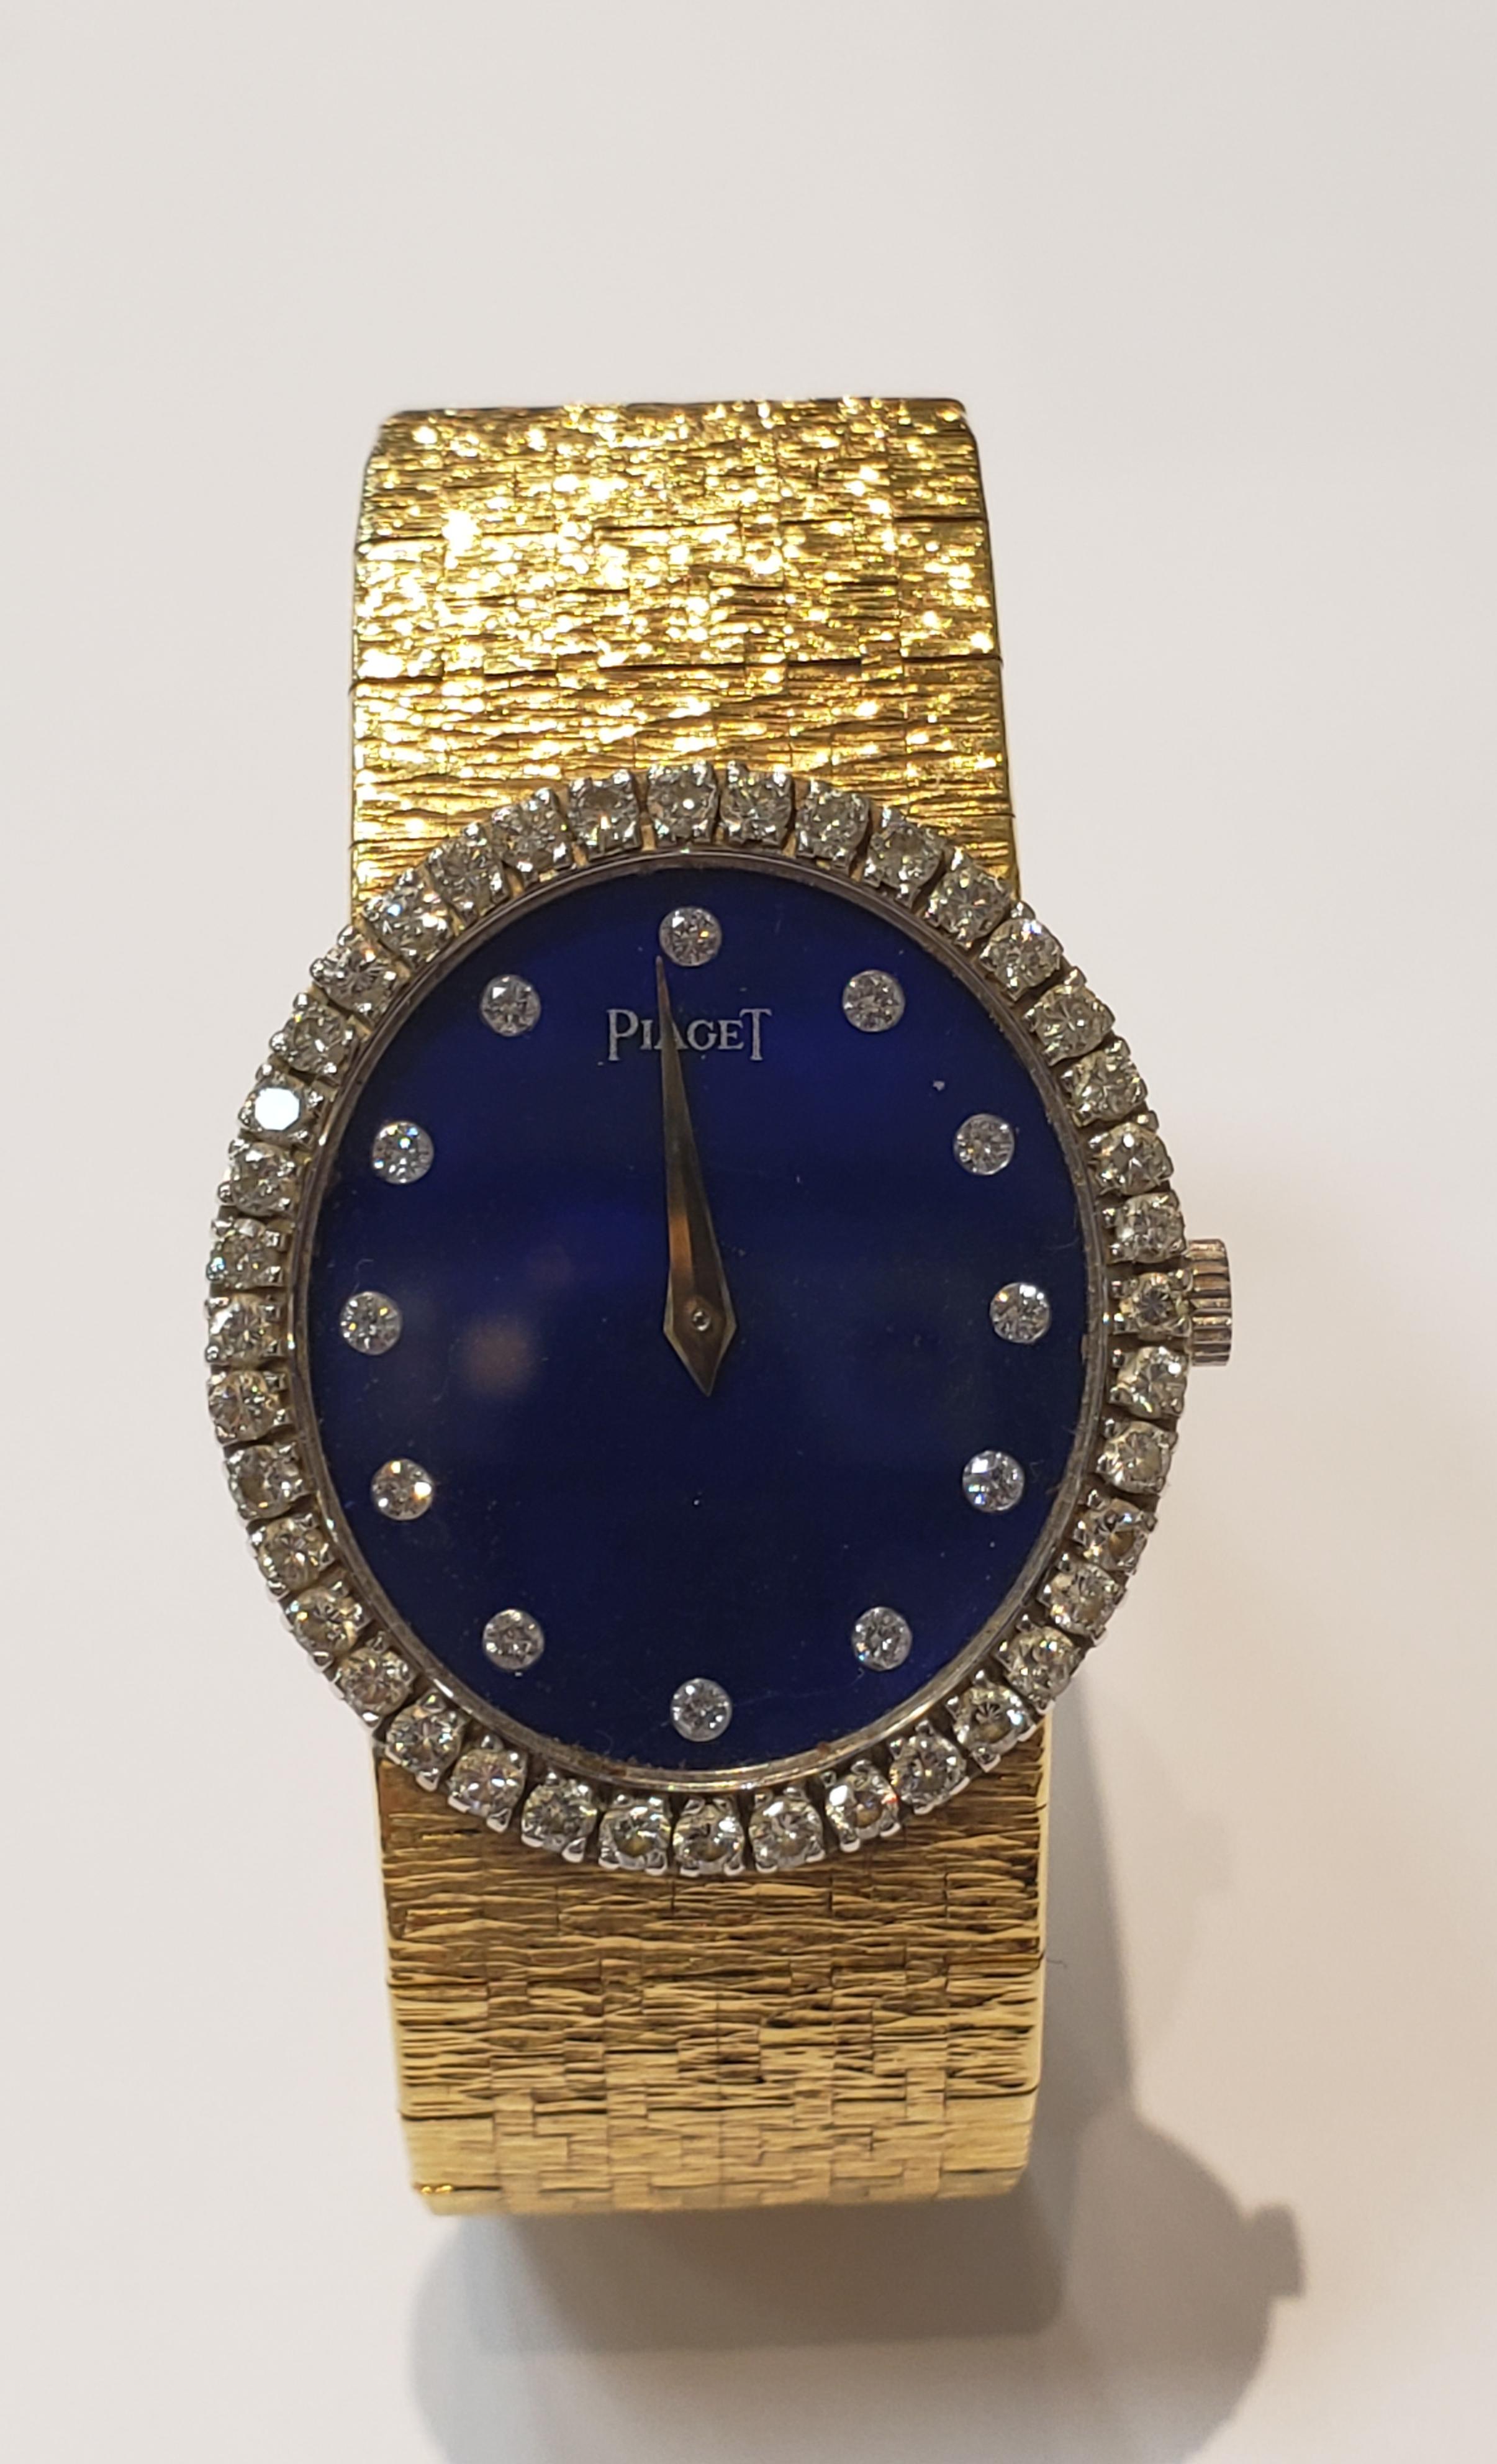 Contemporary Ladies 18 Karat Yellow Gold Piaget Watch with Lapis Dial and Diamond Bezel